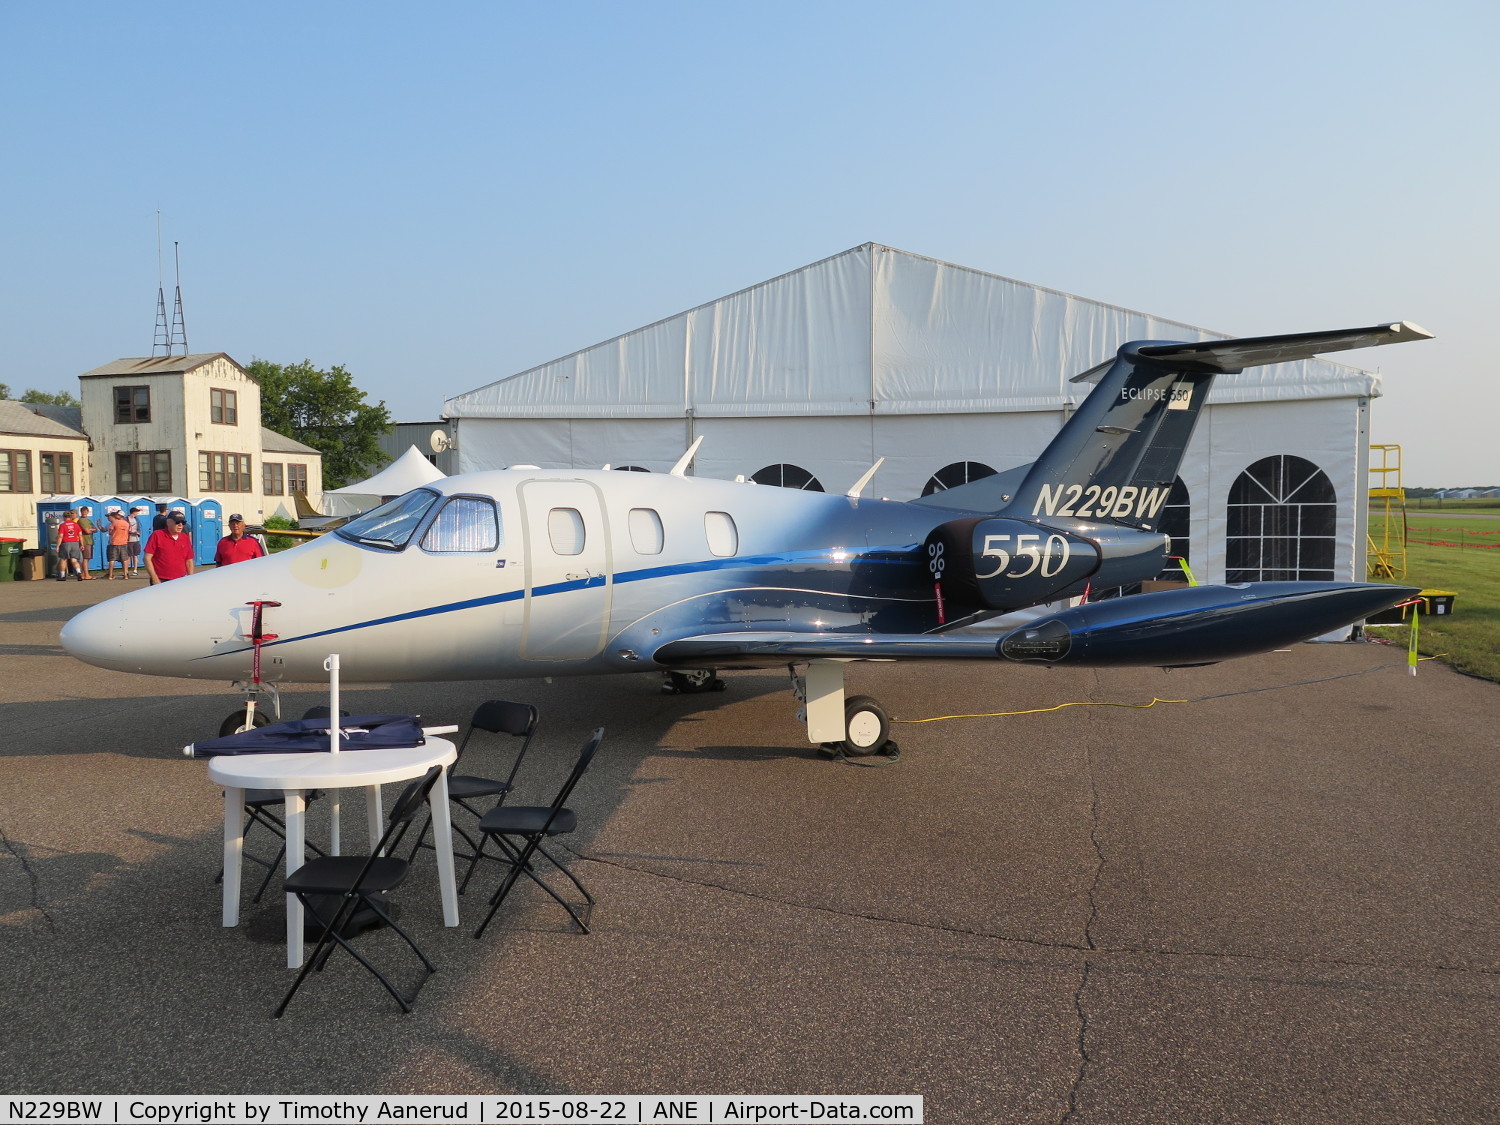 N229BW, 2013 Eclipse Aviation Corp EA550 C/N 550-0264, 2013 Eclipse Aviation Corp 550, c/n: 550-0264